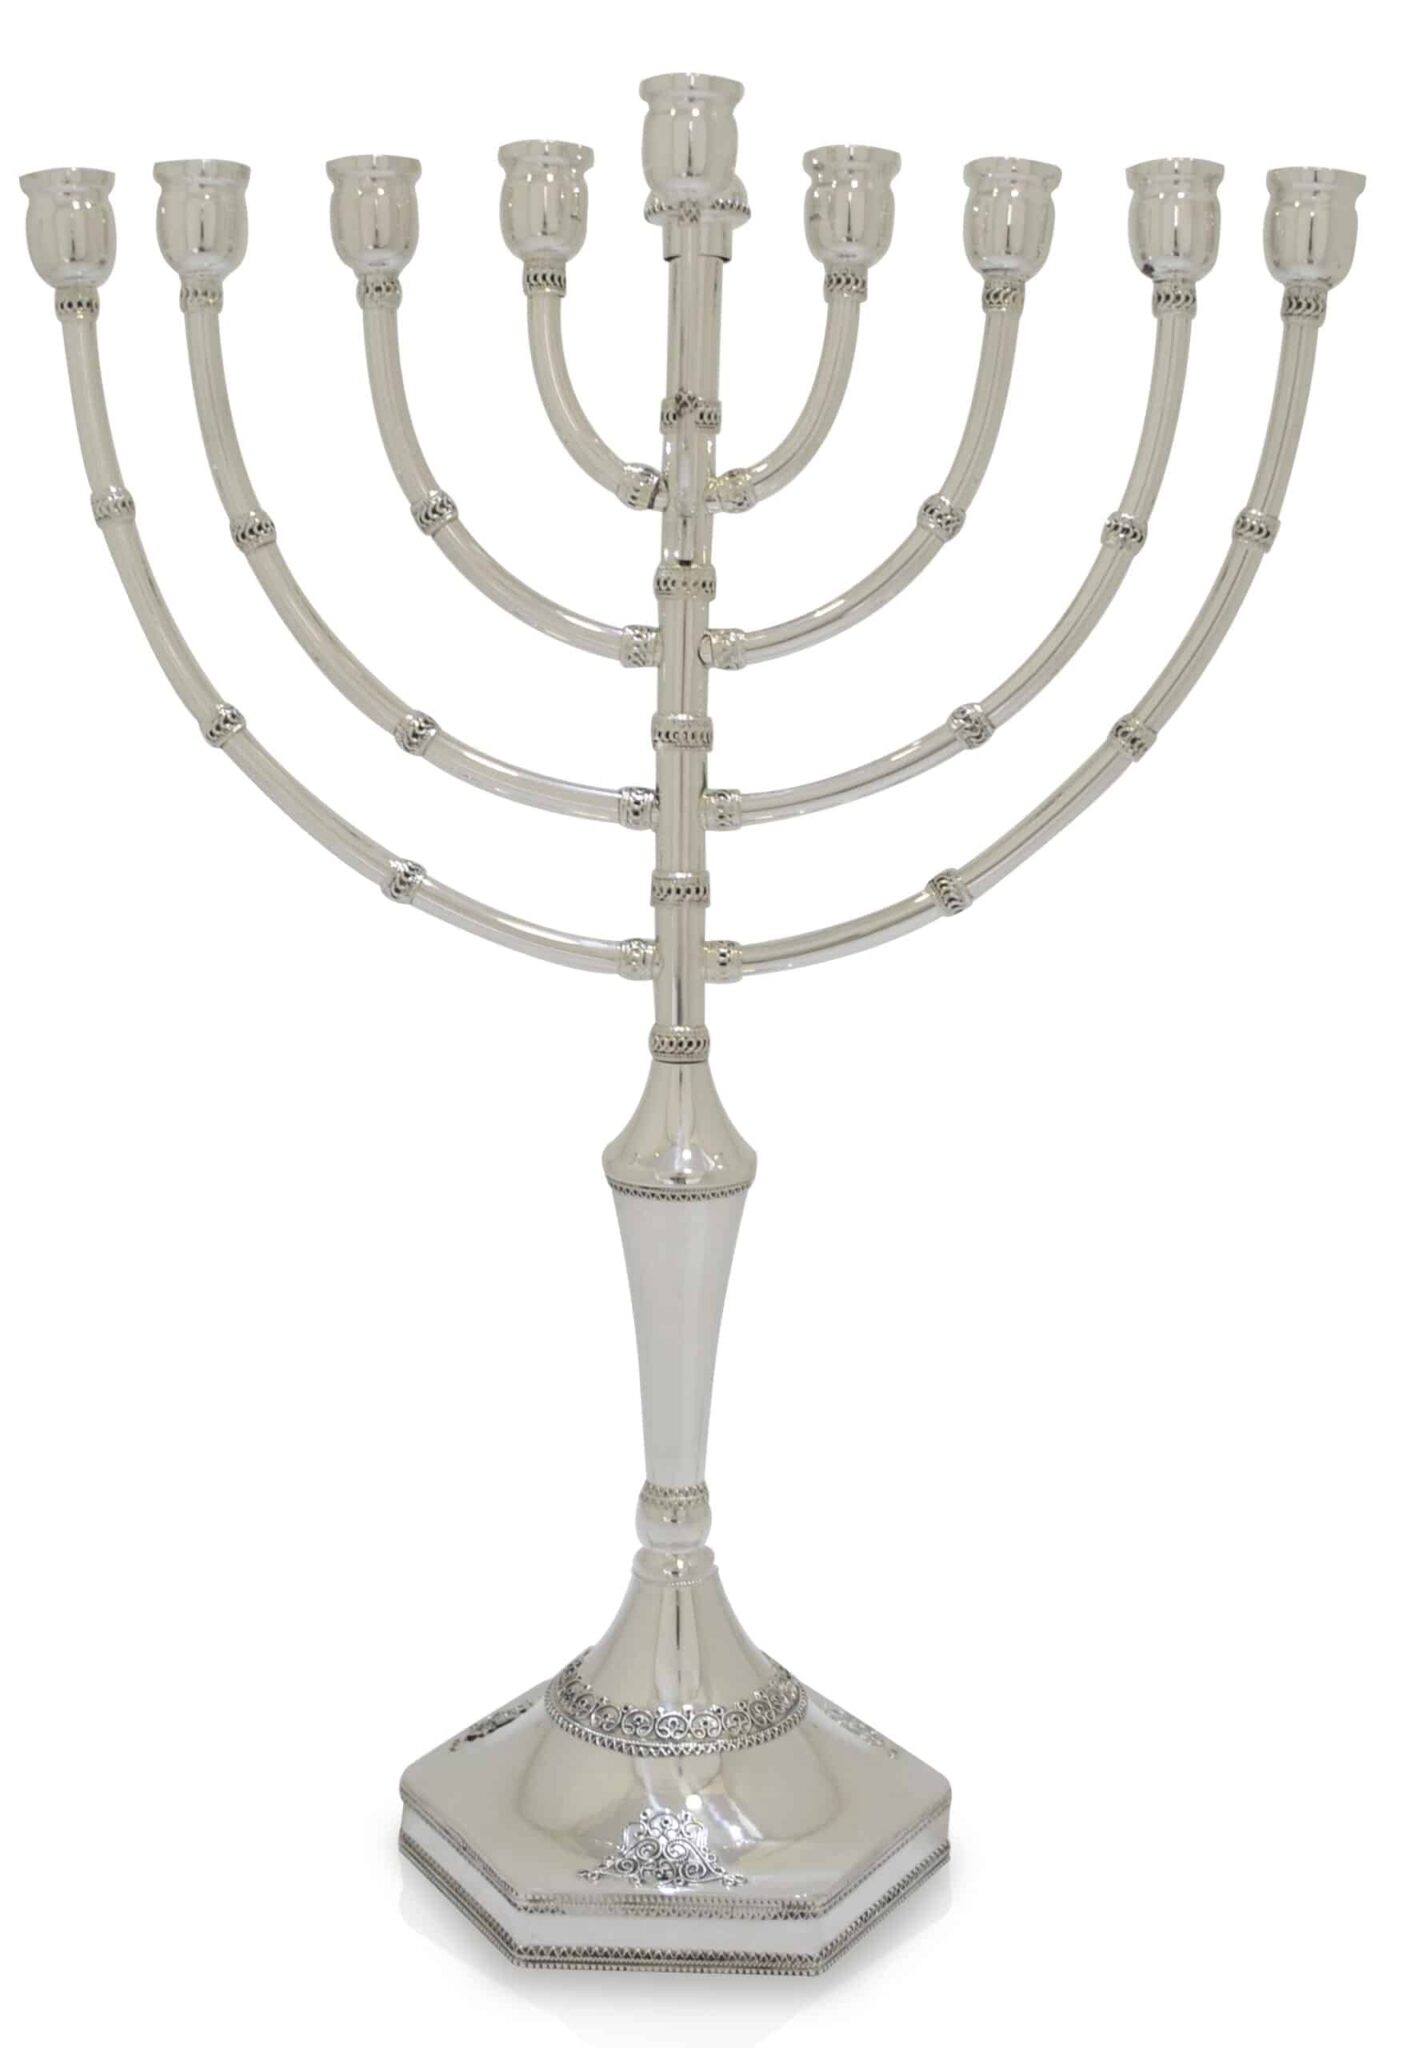 Kinetic Silver Menorah with Filigree Decorations